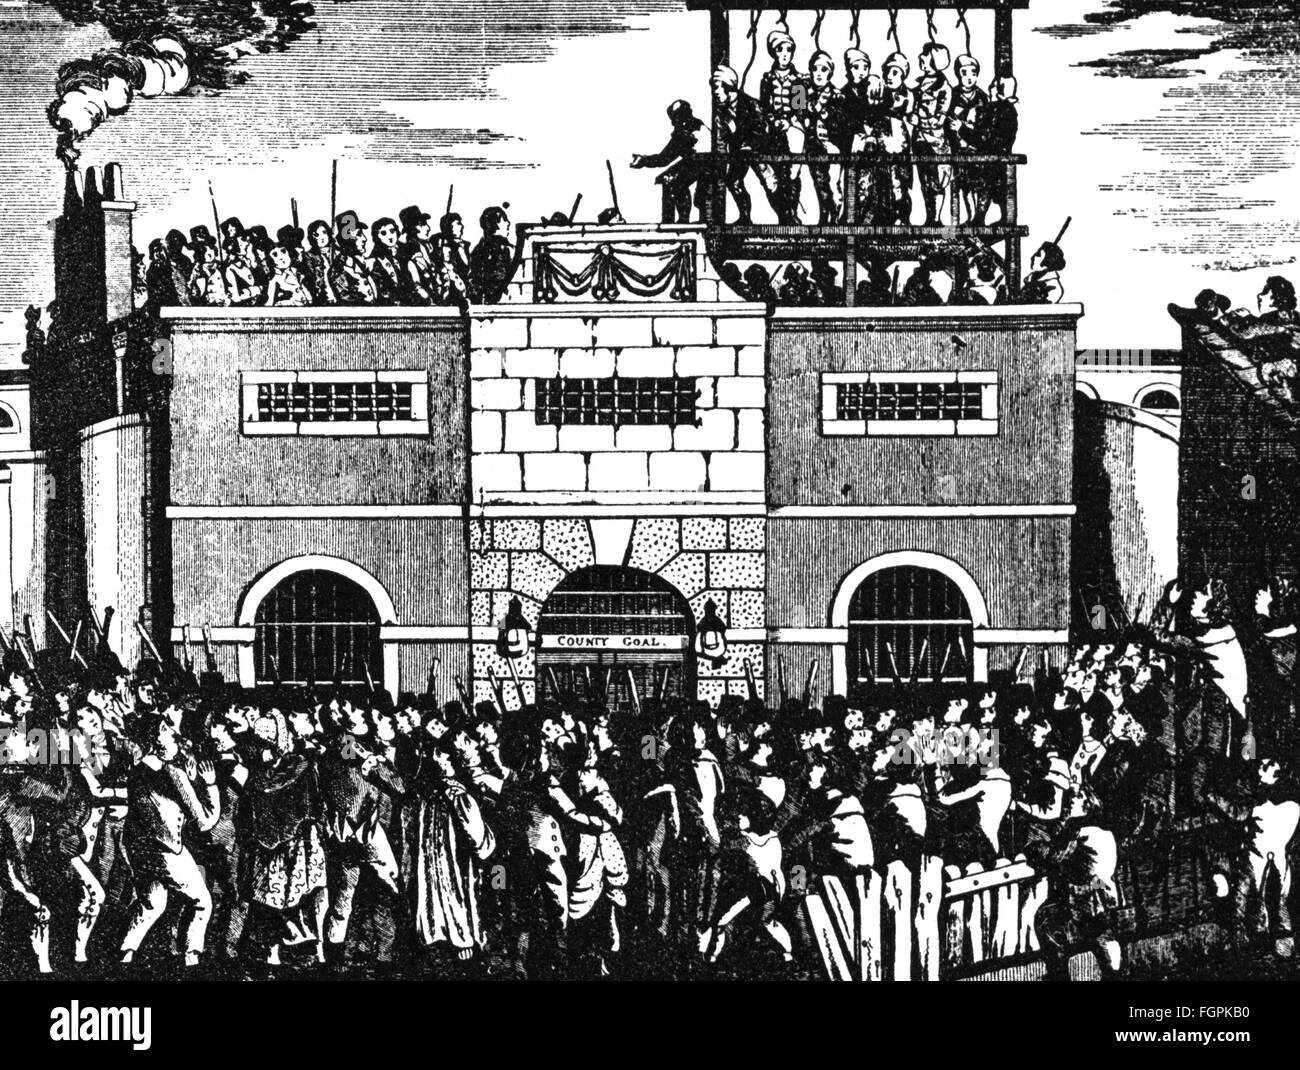 justice, penitentiary system, hanging, public execution on the gallows, Tyburn, engraving, 18th century, 18th century, graphic, graphics, Great Britain, jurisdiction, penalties, punishment, punishments, death penalty, building, buildings, gallows, gibbet, gibbets, viewer, viewers, audience, audiences, hanging, hang, execution, executions, historic, historical, crowd, crowds, people, Additional-Rights-Clearences-Not Available Stock Photo